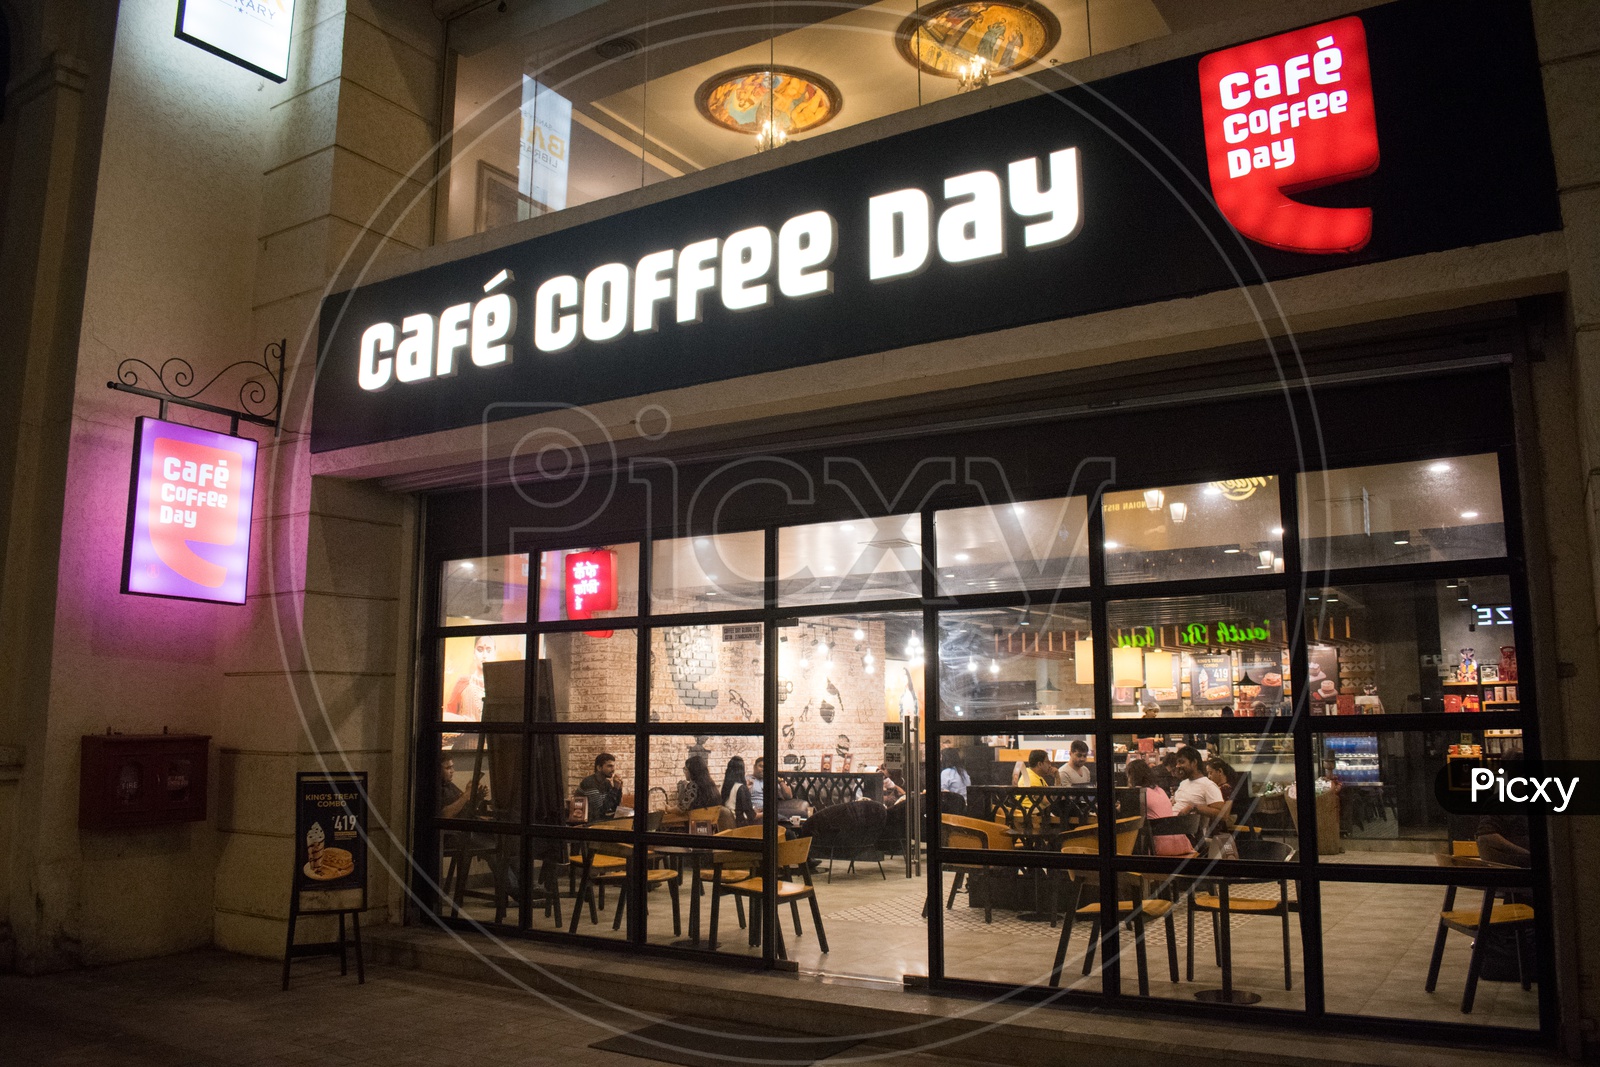 Coffee day outlet in the walk